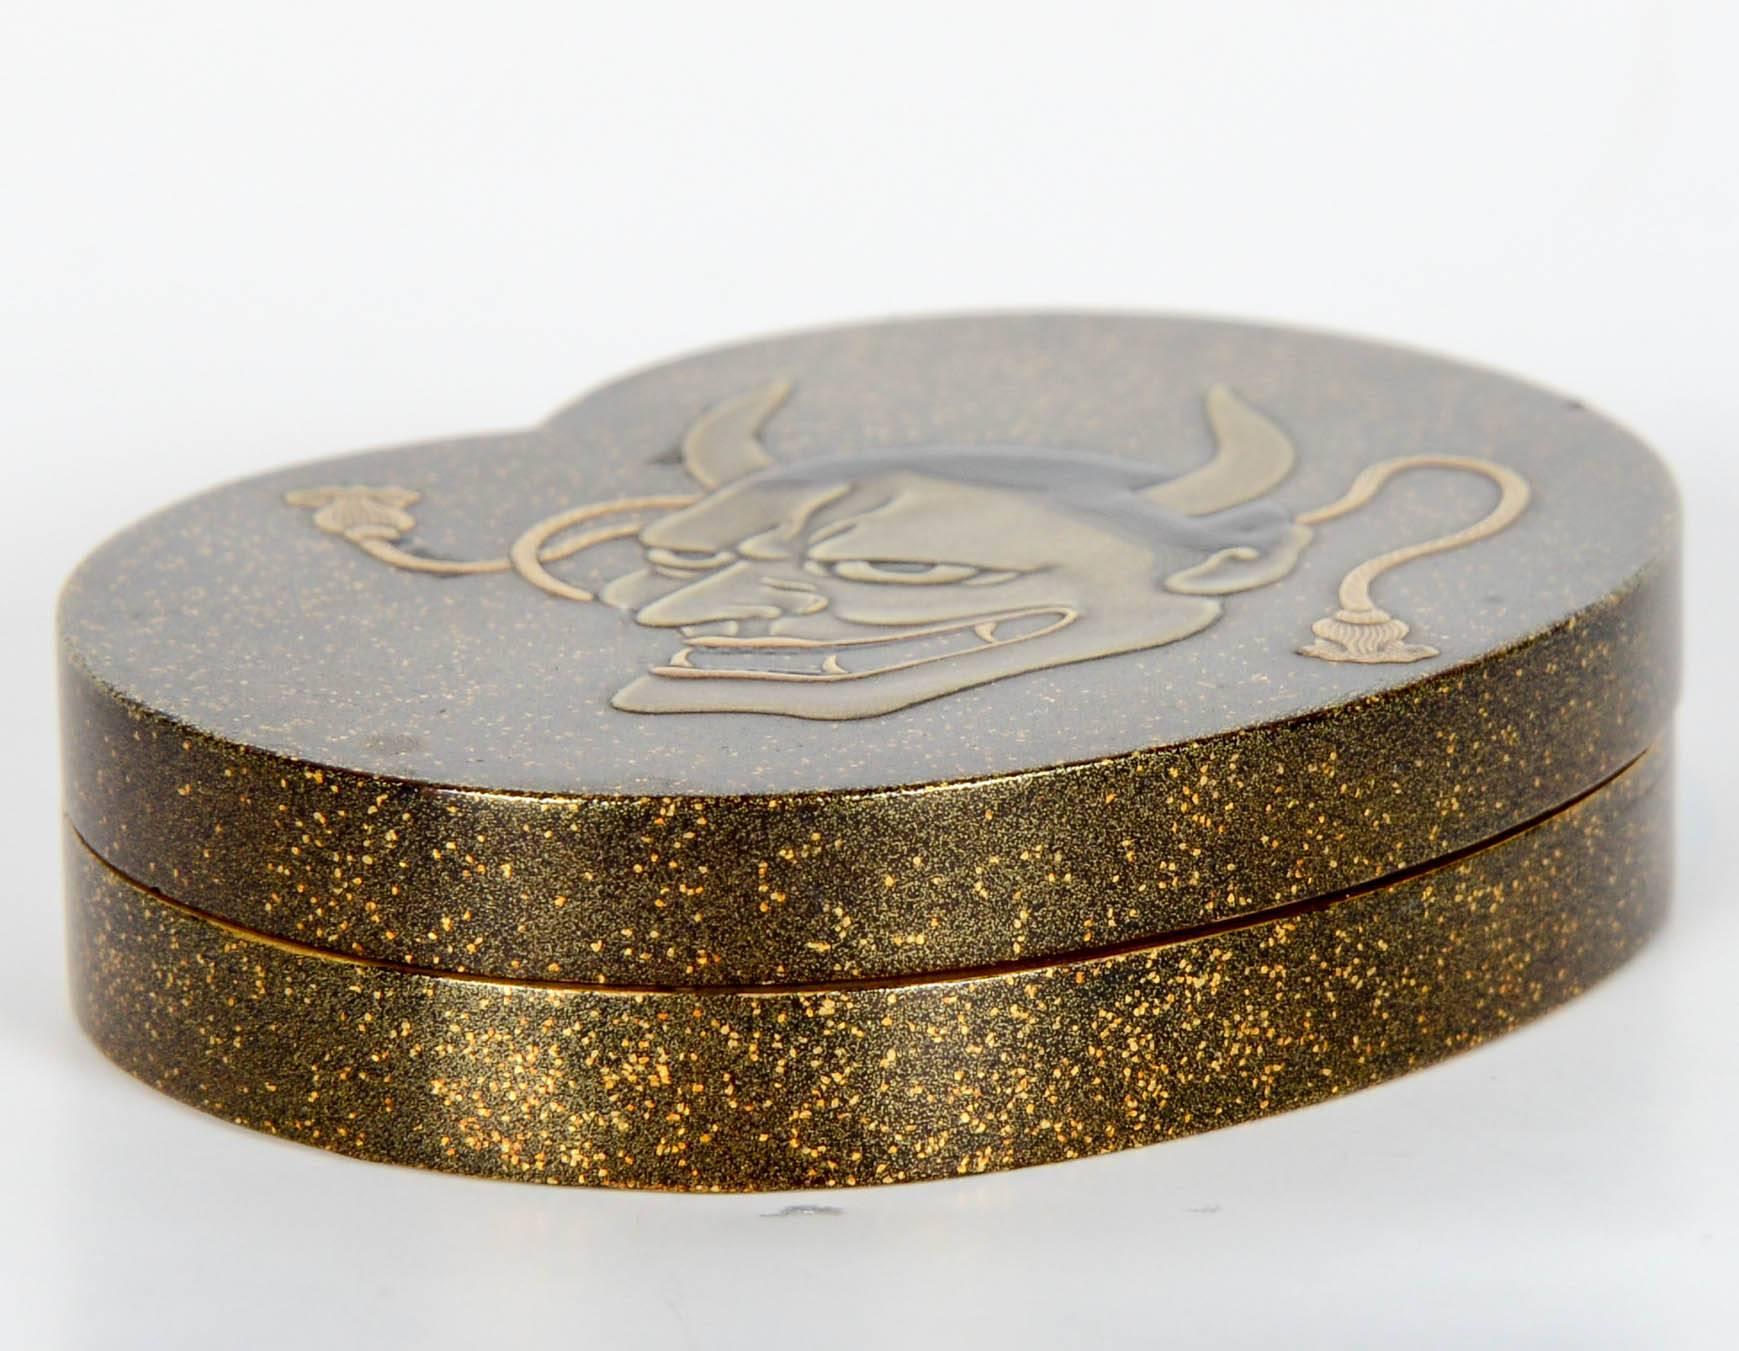 Small kidney shaped lacquer nashiji kobako. The lid features the no mask of Noh theater character representing the Hannya demon in polychrome lacquer.
The interior is in nashi-ji gold lacquer.

Japan - Meiji (1868-1912).

Height 1.5 cm - length